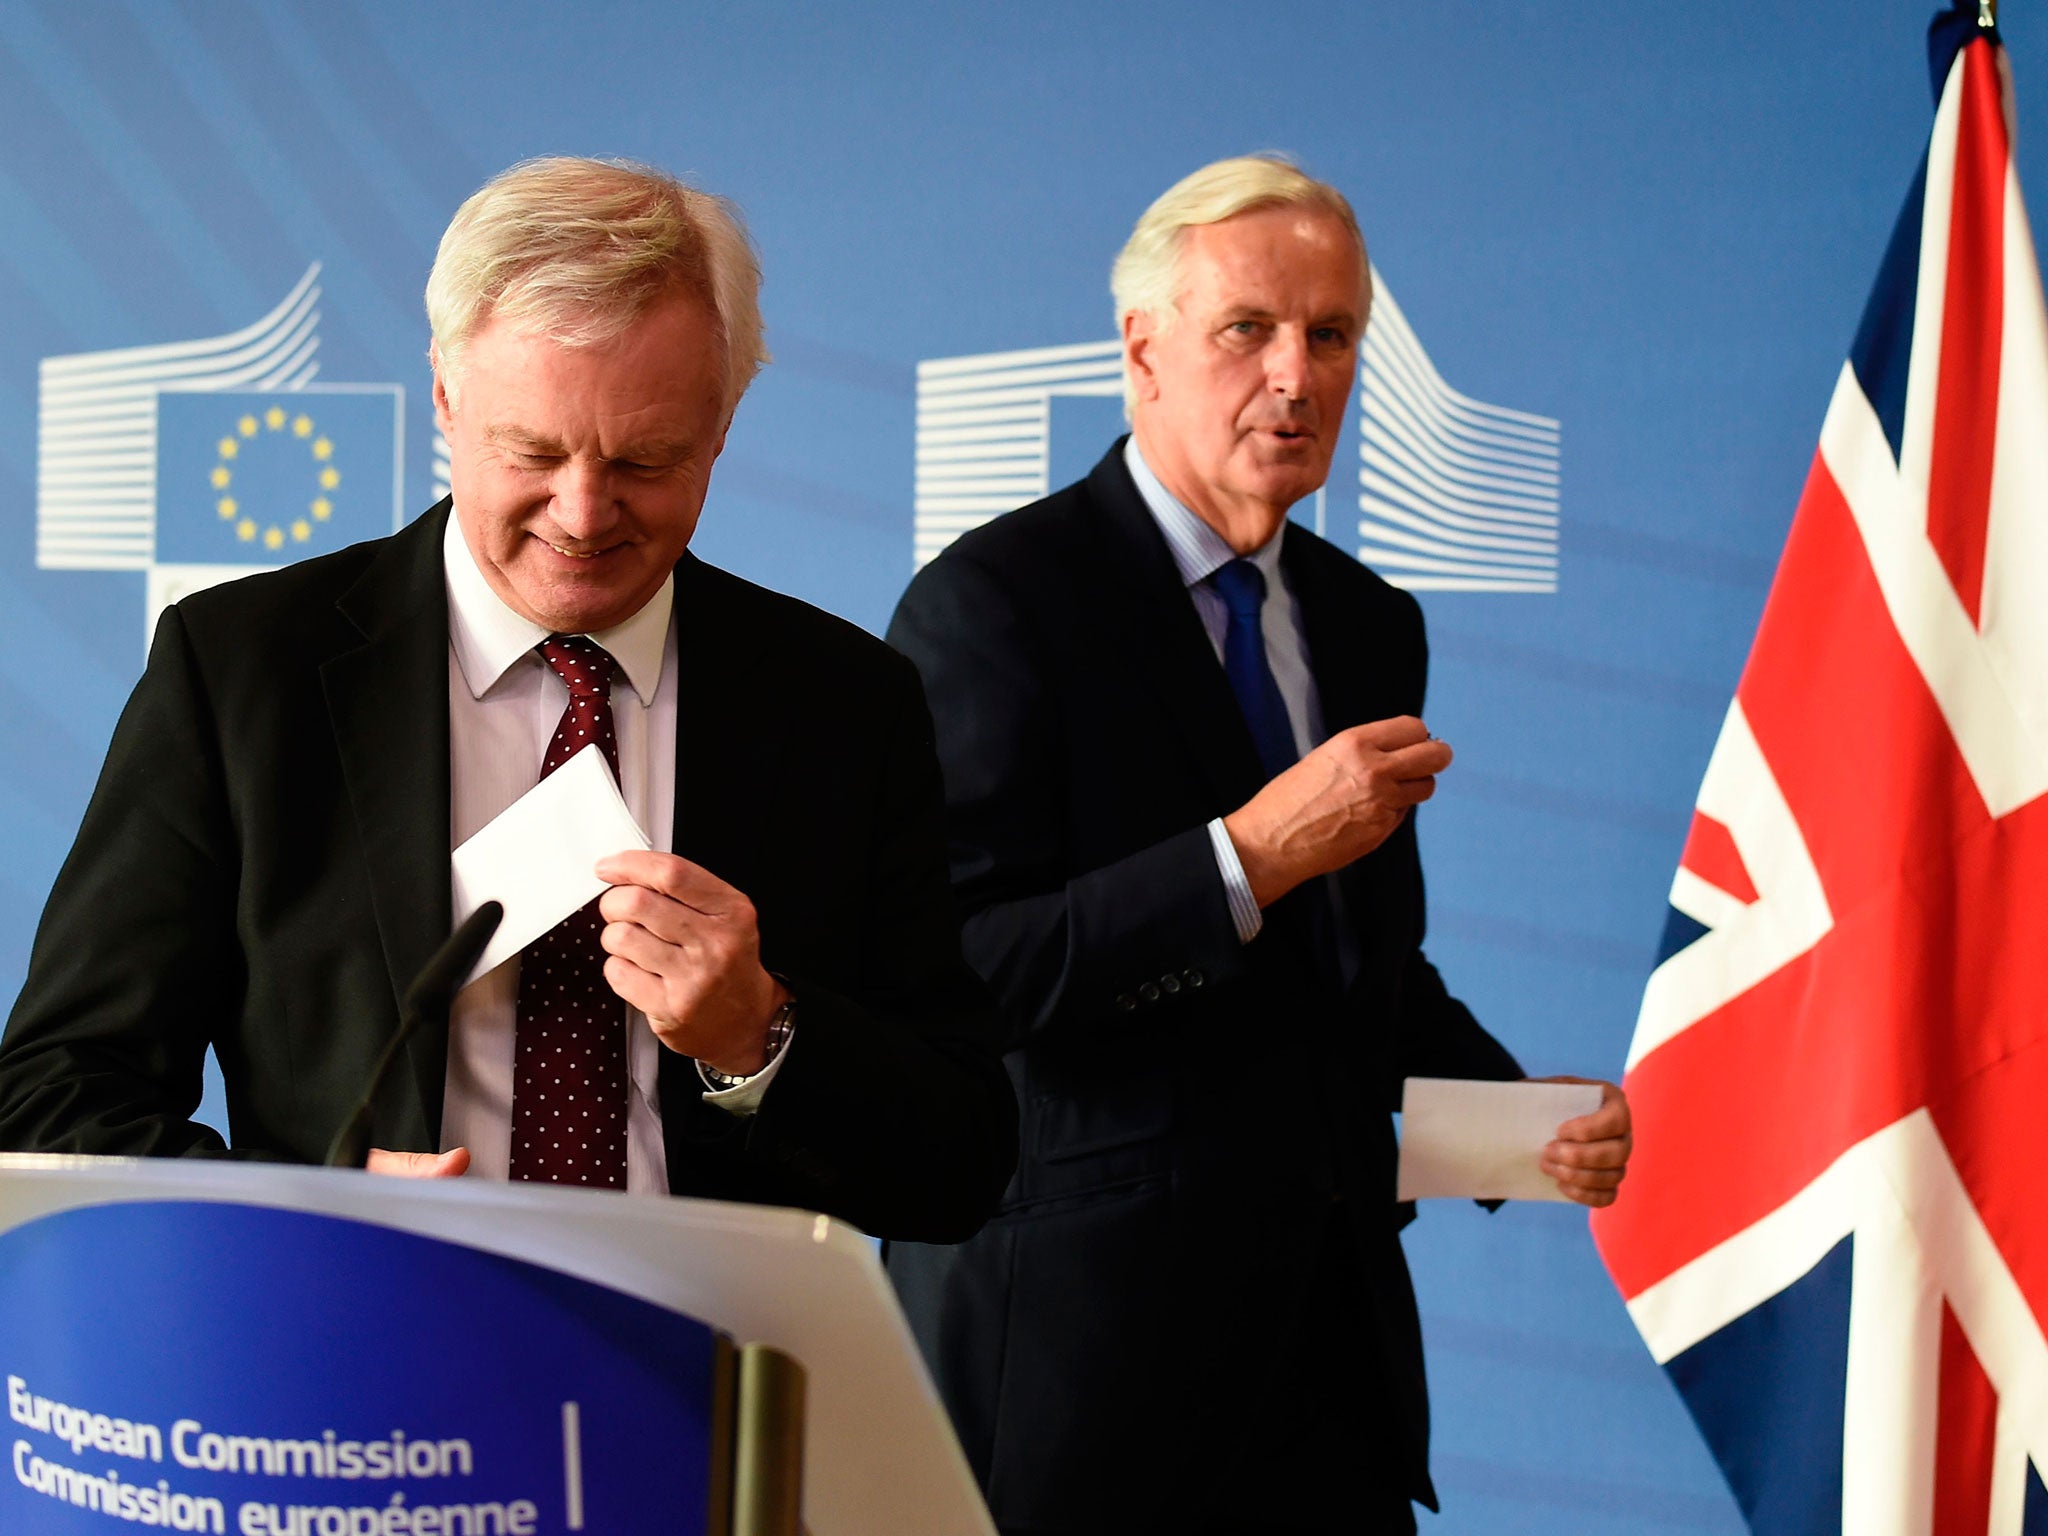 Michel Barnier and David Davis appear to have made little progress during Brussels discussions